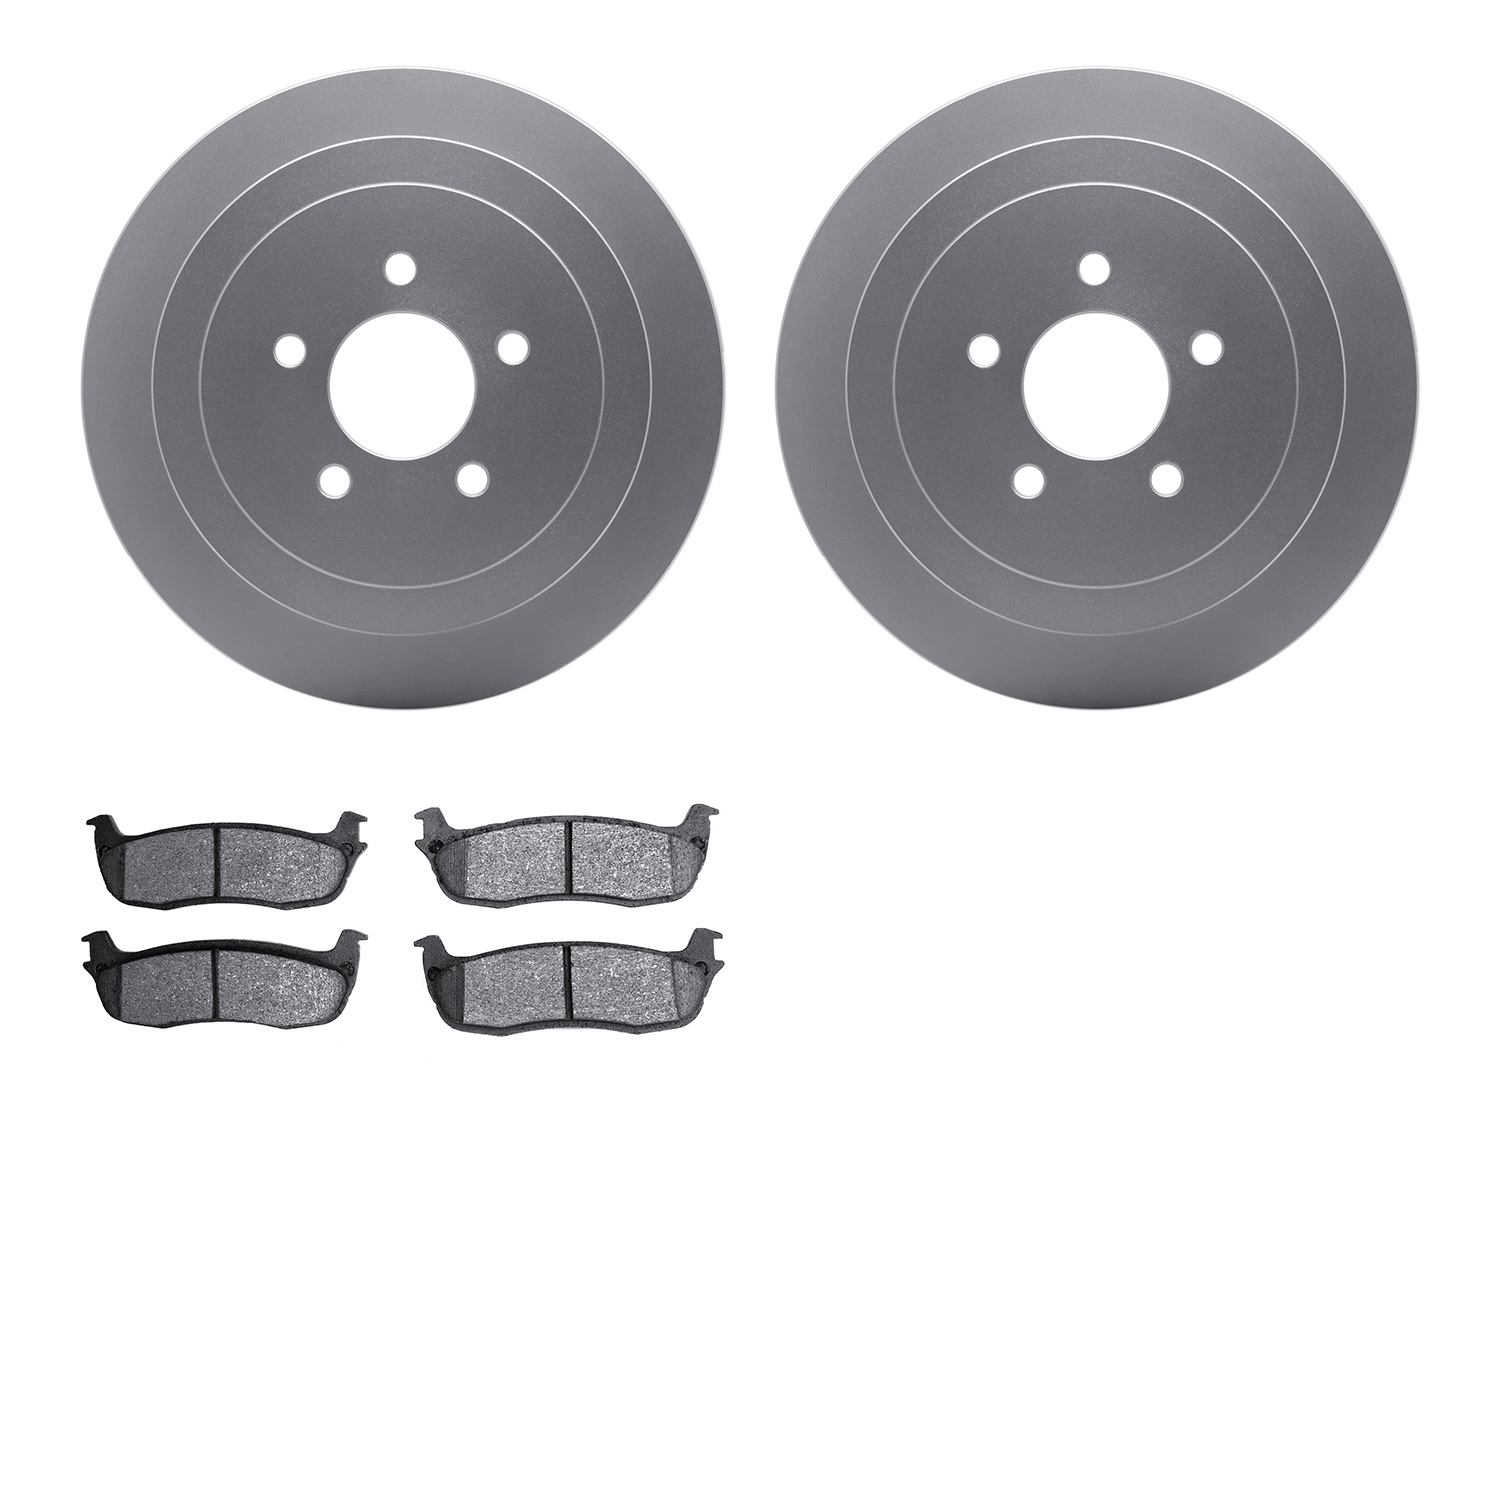 4402-55001 Geospec Brake Rotors with Ultimate-Duty Brake Pads Kit, 2003-2011 Ford/Lincoln/Mercury/Mazda, Position: Rear